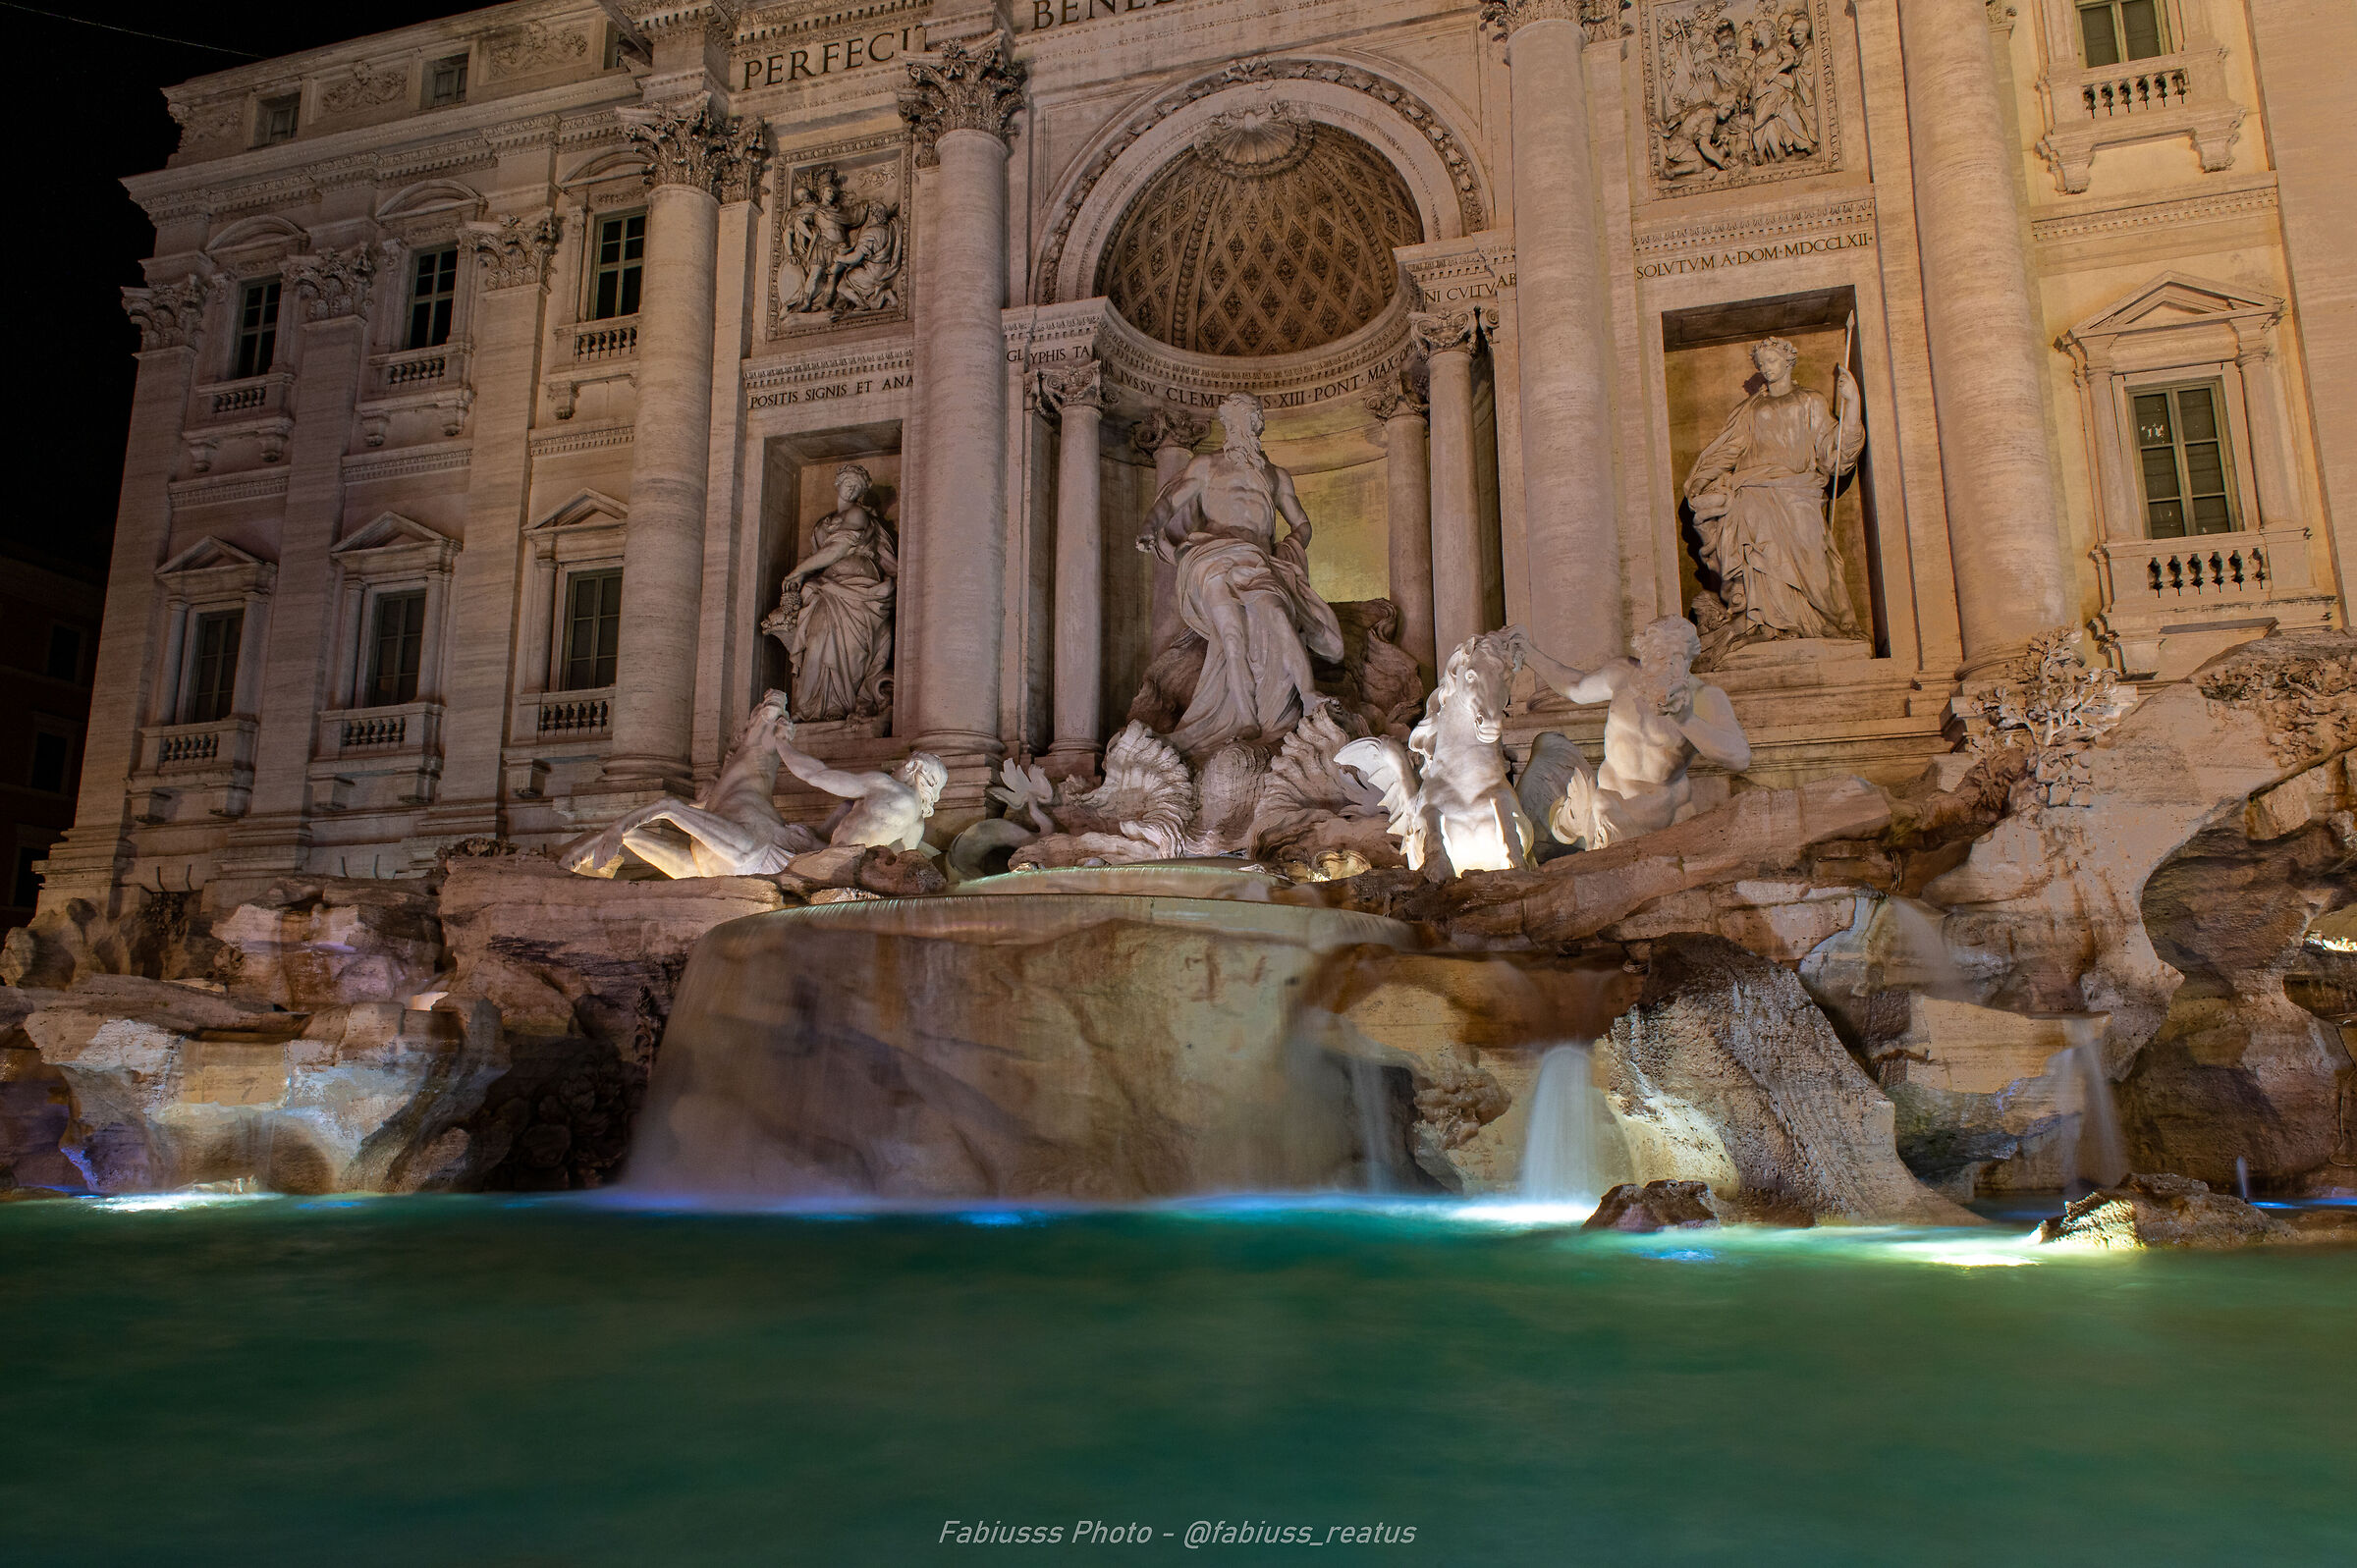 The most famous fountain in the world...